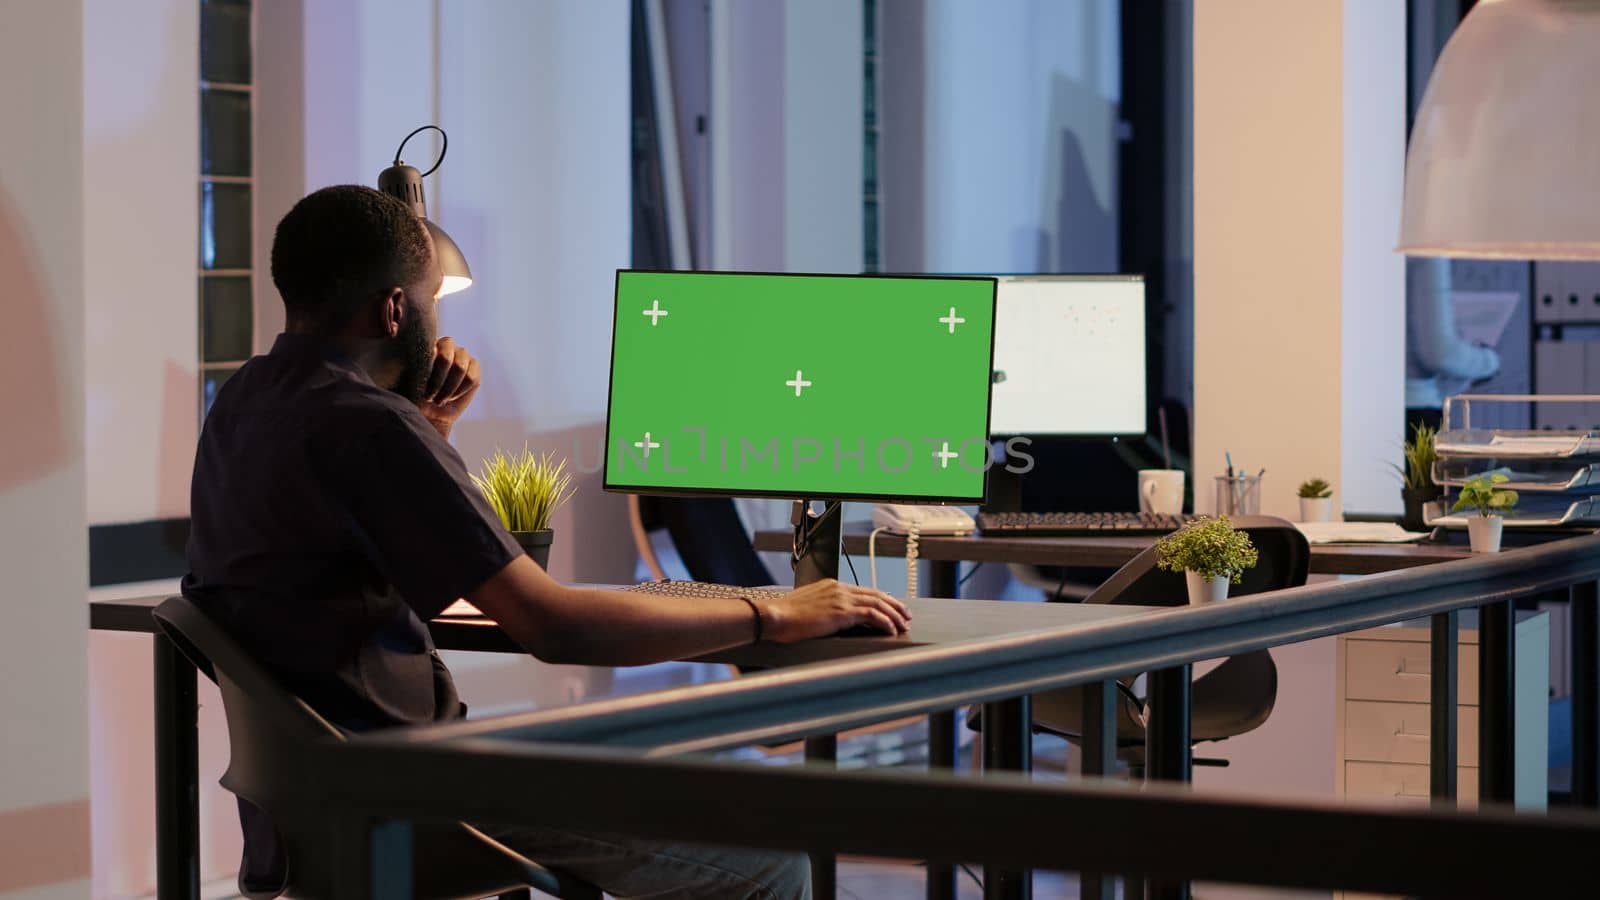 Startup worker analyzing greenscreen on monitor in office with big windows, looking at desktop isolated screen. Working with chroma key display, blank copyspace and mockup template. Tripod shot.